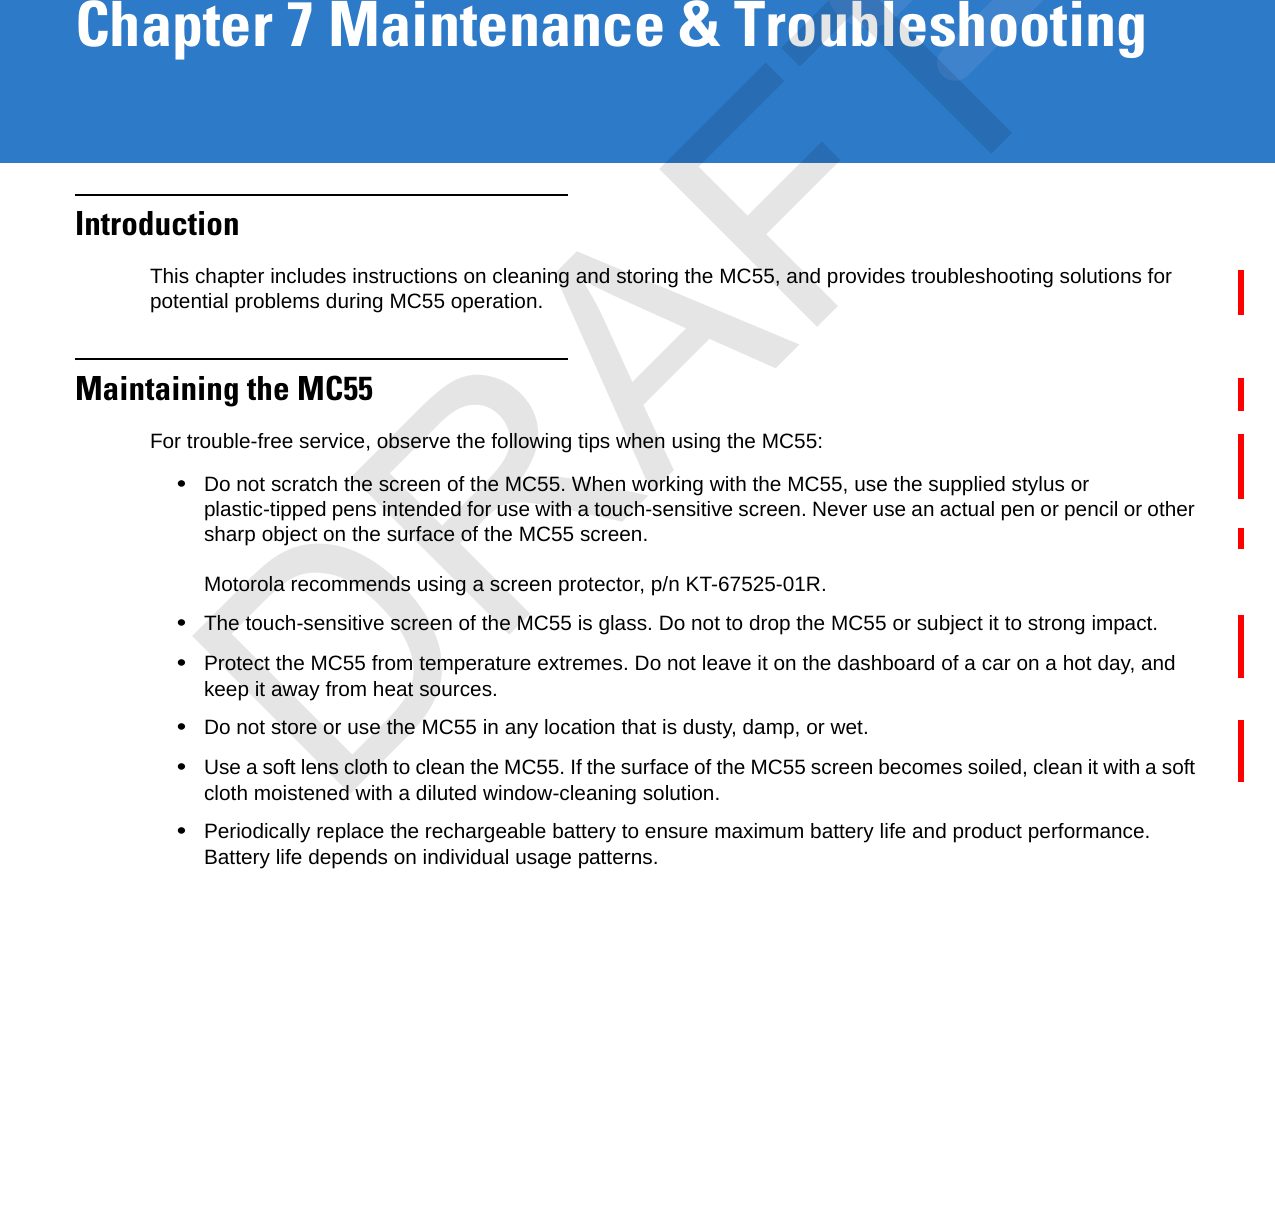 Chapter 7 Maintenance &amp; TroubleshootingIntroductionThis chapter includes instructions on cleaning and storing the MC55, and provides troubleshooting solutions for potential problems during MC55 operation.Maintaining the MC55For trouble-free service, observe the following tips when using the MC55:•Do not scratch the screen of the MC55. When working with the MC55, use the supplied stylus or plastic-tipped pens intended for use with a touch-sensitive screen. Never use an actual pen or pencil or other sharp object on the surface of the MC55 screen. Motorola recommends using a screen protector, p/n KT-67525-01R.•The touch-sensitive screen of the MC55 is glass. Do not to drop the MC55 or subject it to strong impact.•Protect the MC55 from temperature extremes. Do not leave it on the dashboard of a car on a hot day, and keep it away from heat sources.•Do not store or use the MC55 in any location that is dusty, damp, or wet.•Use a soft lens cloth to clean the MC55. If the surface of the MC55 screen becomes soiled, clean it with a soft cloth moistened with a diluted window-cleaning solution.•Periodically replace the rechargeable battery to ensure maximum battery life and product performance. Battery life depends on individual usage patterns.DRAFT